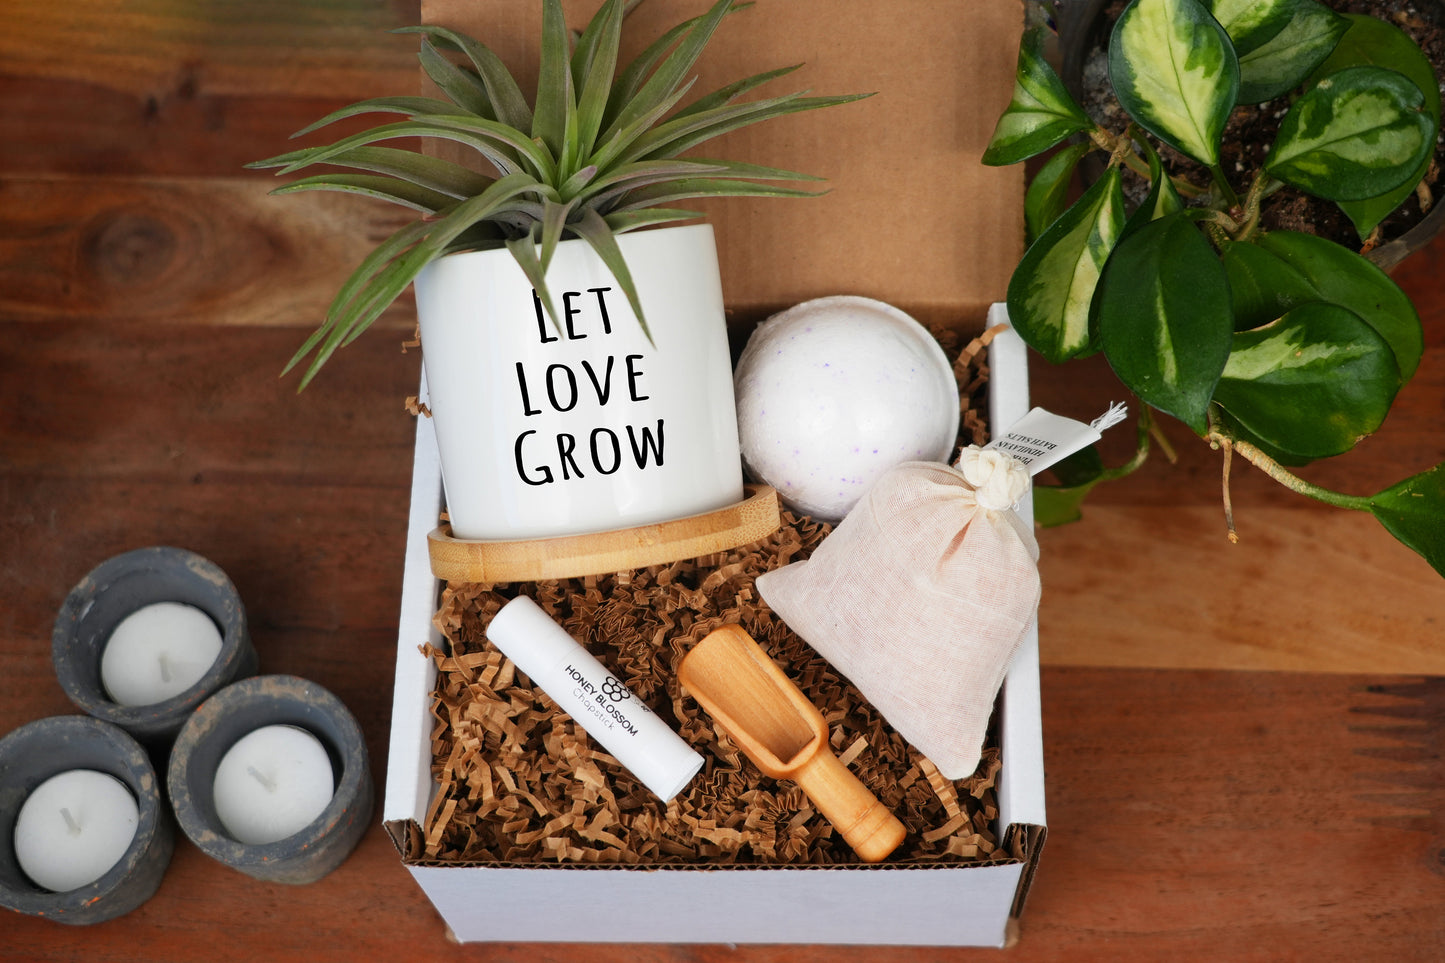 Spa Gift Box - Birthday Gift - 3" White Ceramic Pot w/ Tray, Personalized Planter, Wedding Anniversary Gift, Let Love Grow, Gift For Her